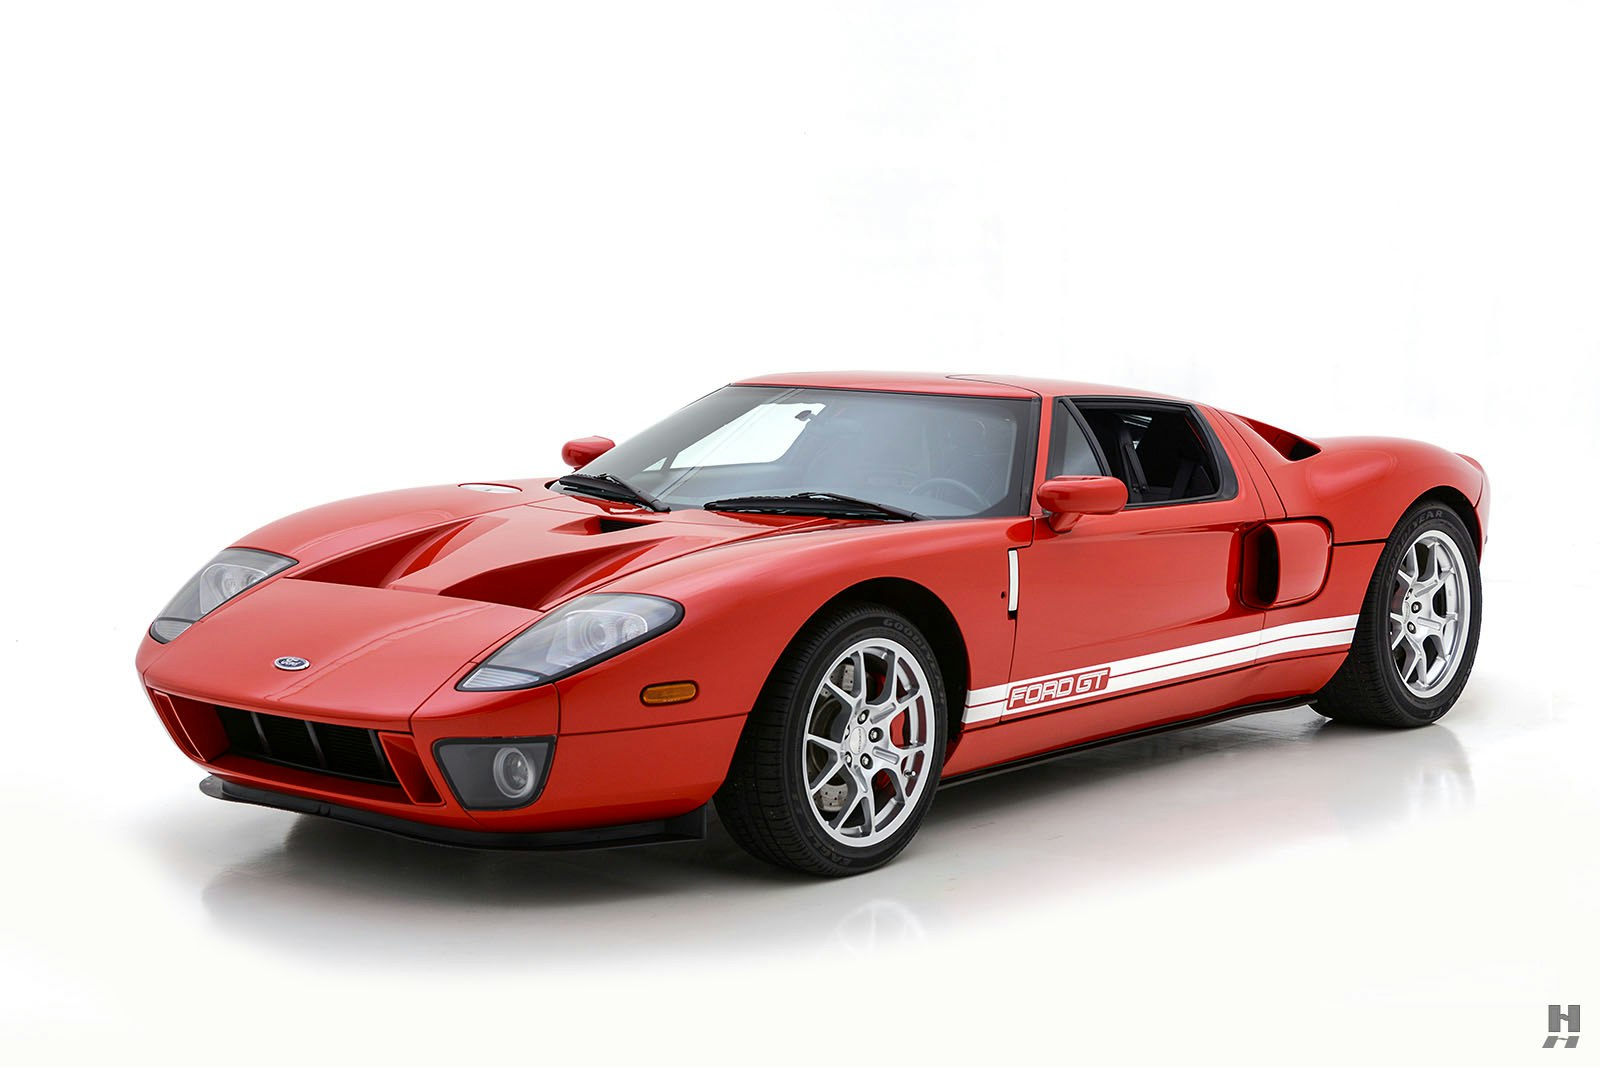 2006 Ford GT 2dr Coupe Courtesy of Hyman Ltd.